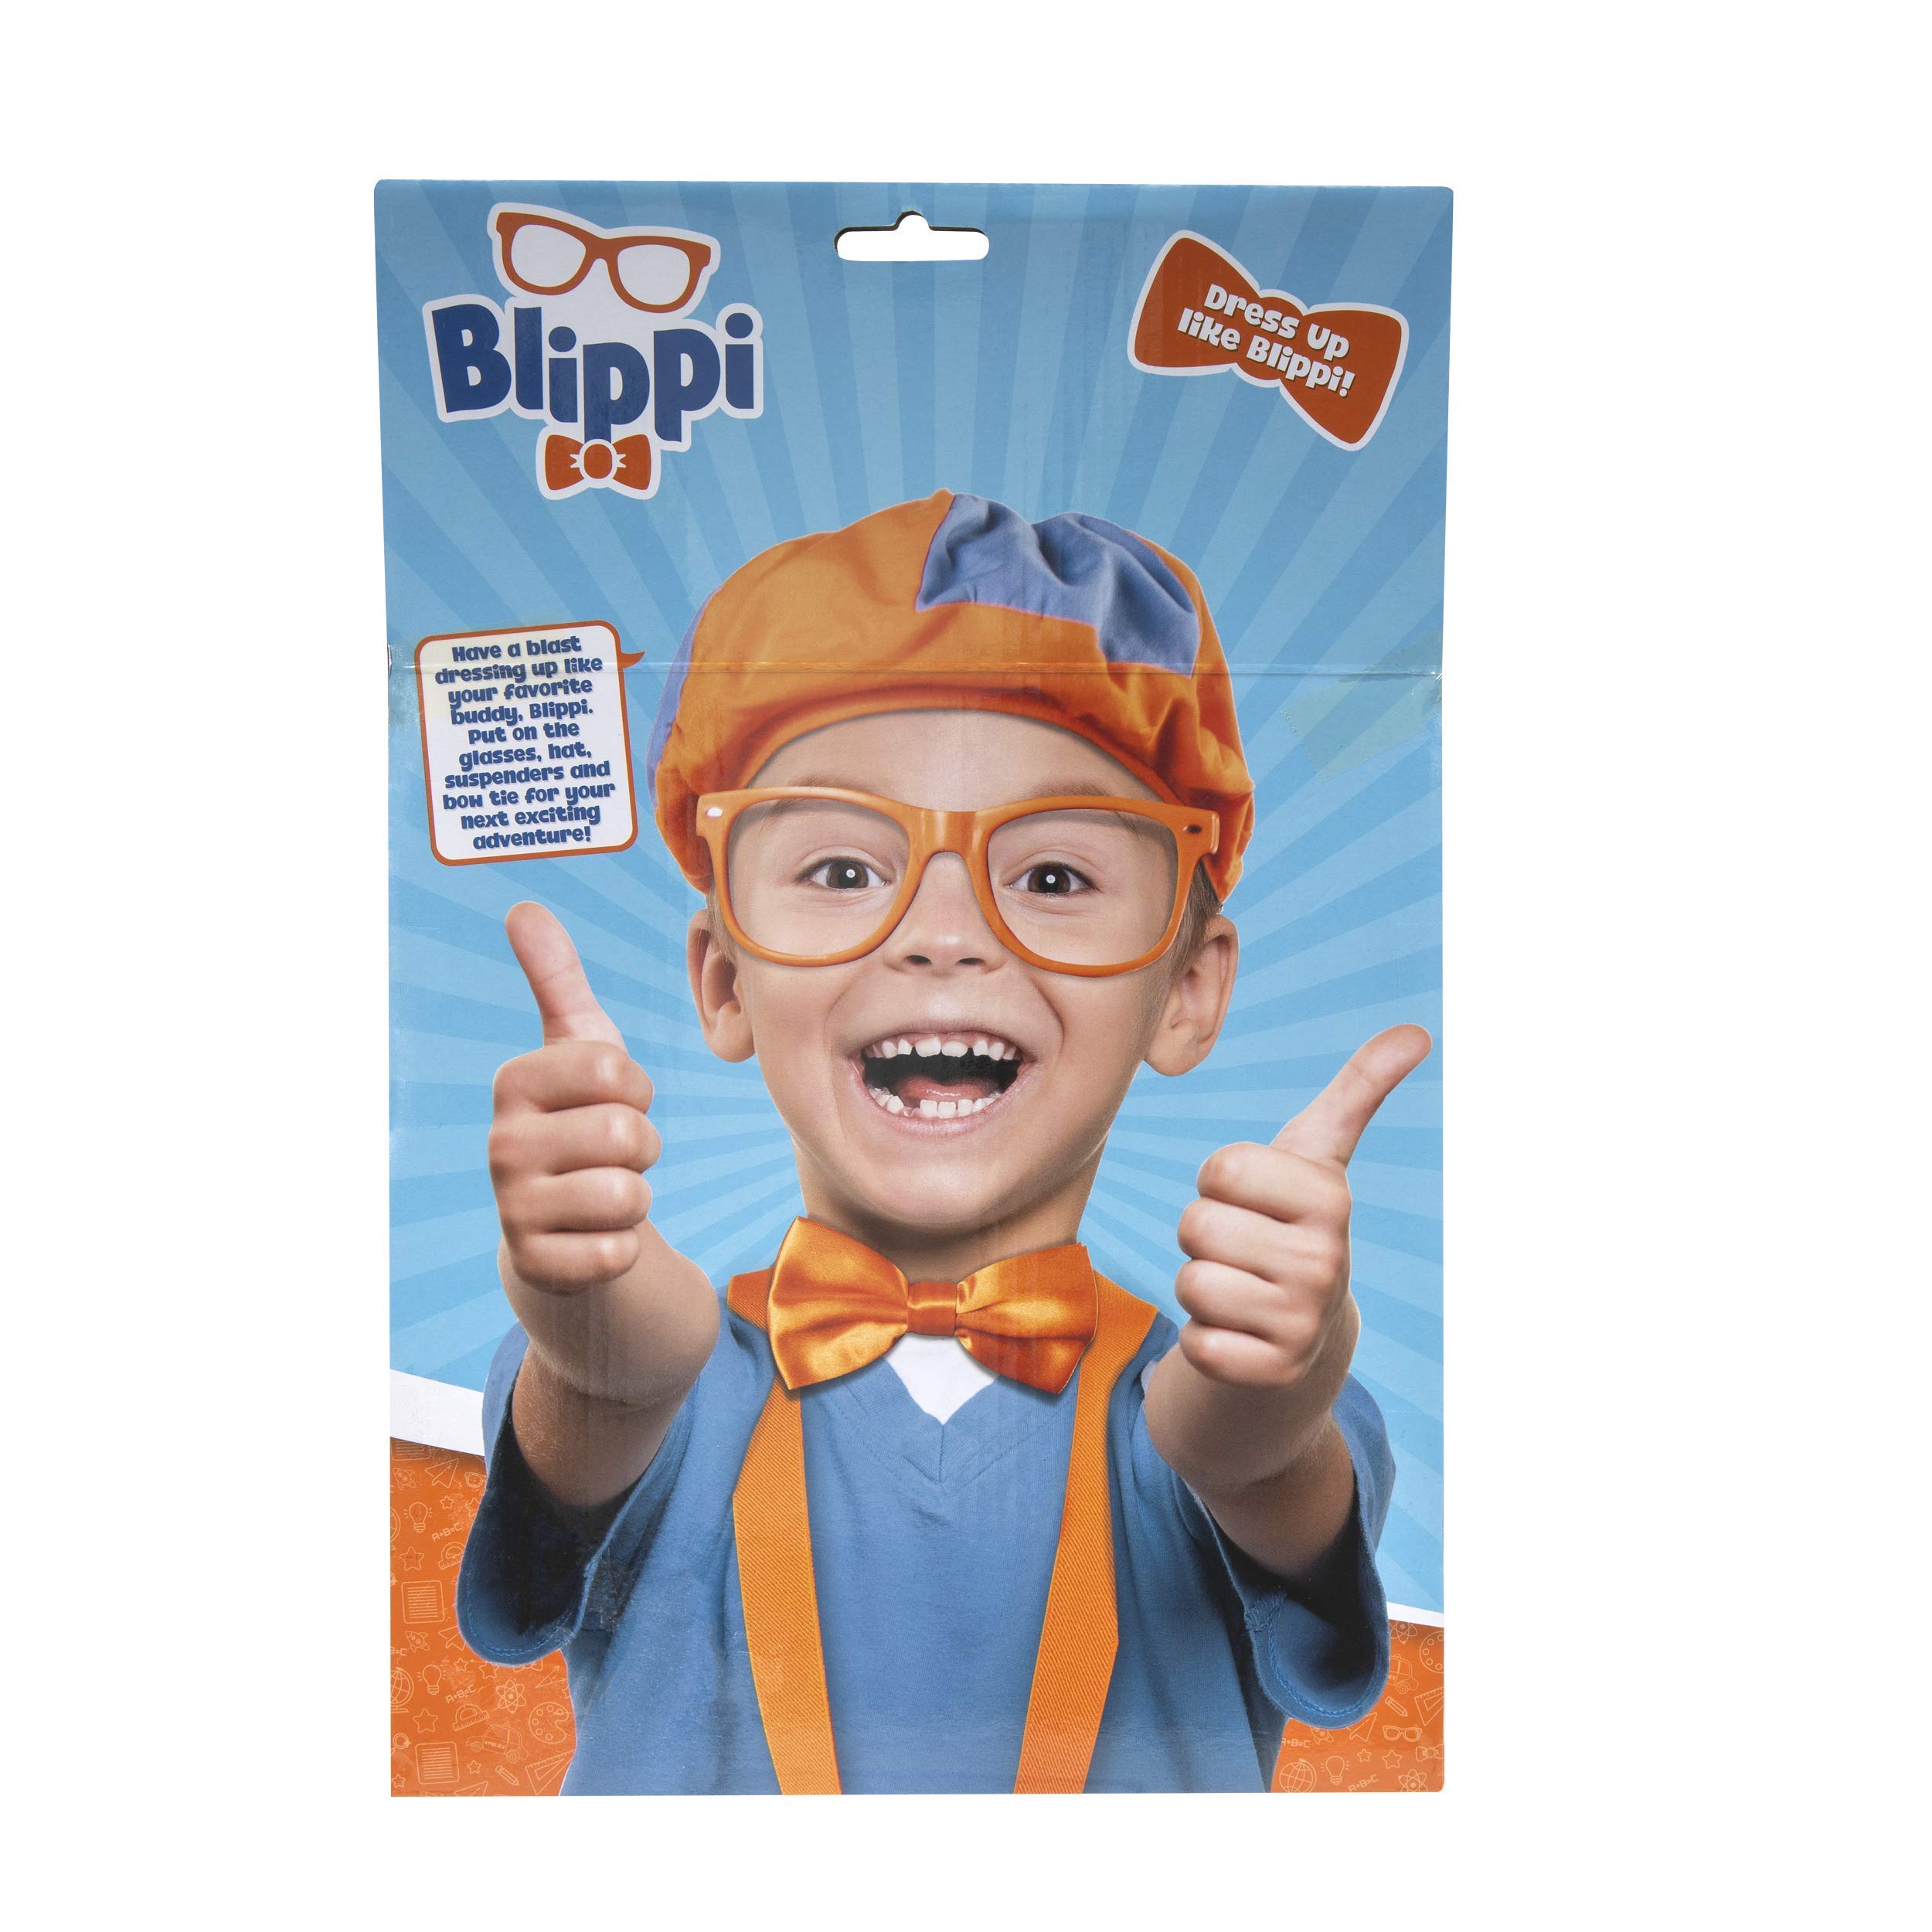 Blippi Costume Roleplay Accessories, Perfect for Dress Up and Play Time - Includes Iconic Orange Bow Tie, Suspenders, Hats and Glasses, for Young Children and Toddlers - Roleplay Set